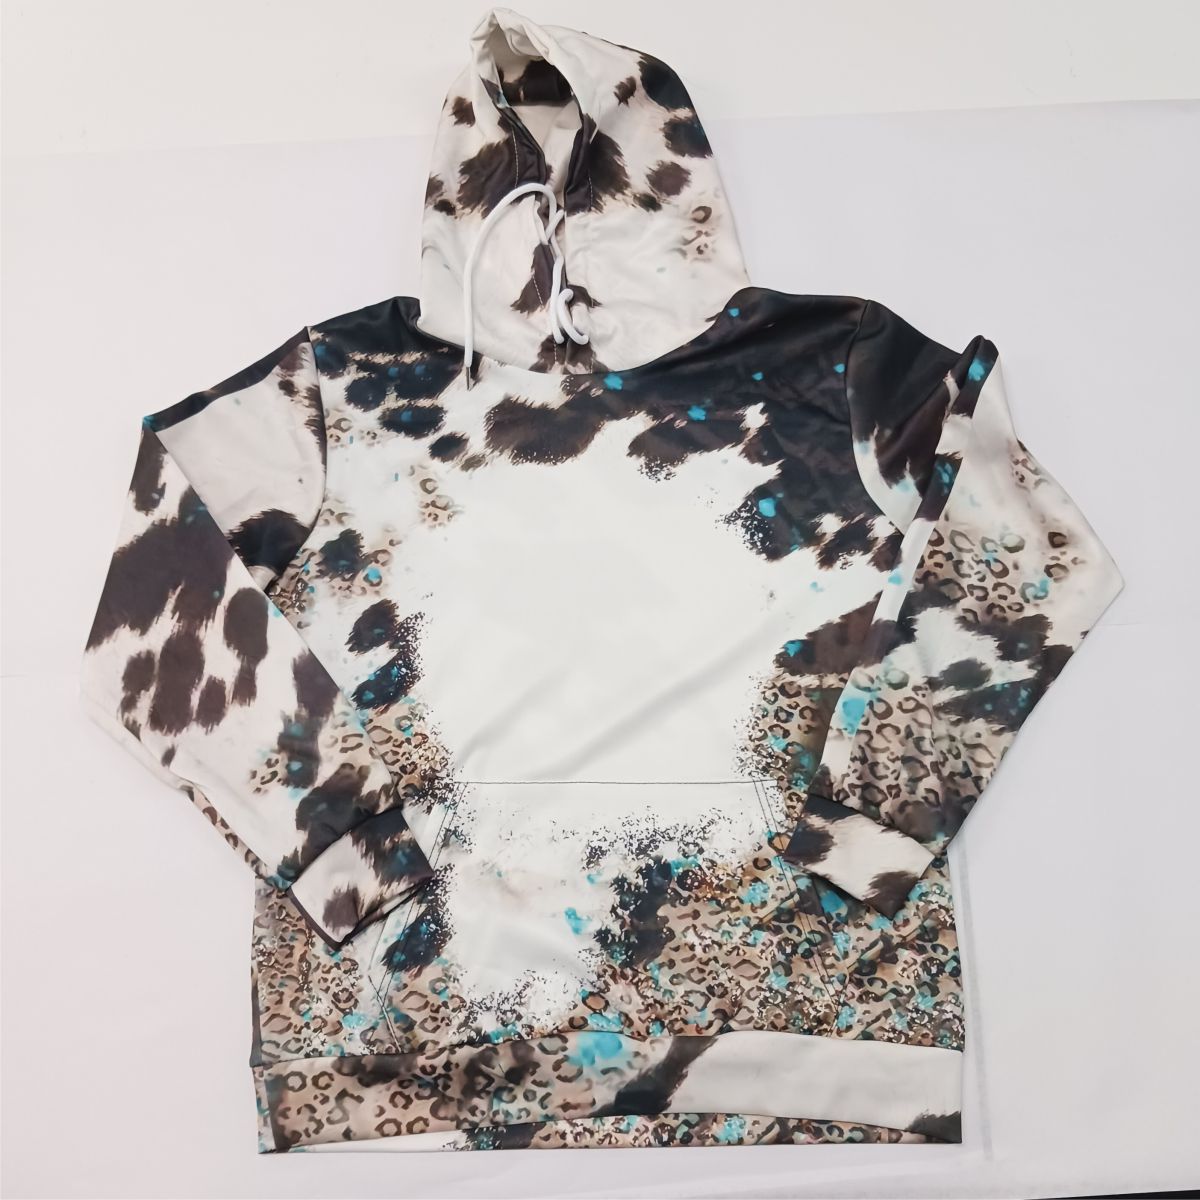 Hoodie for Sublimation 100% Polyester (NEW STYLE) – The Blanks Spot